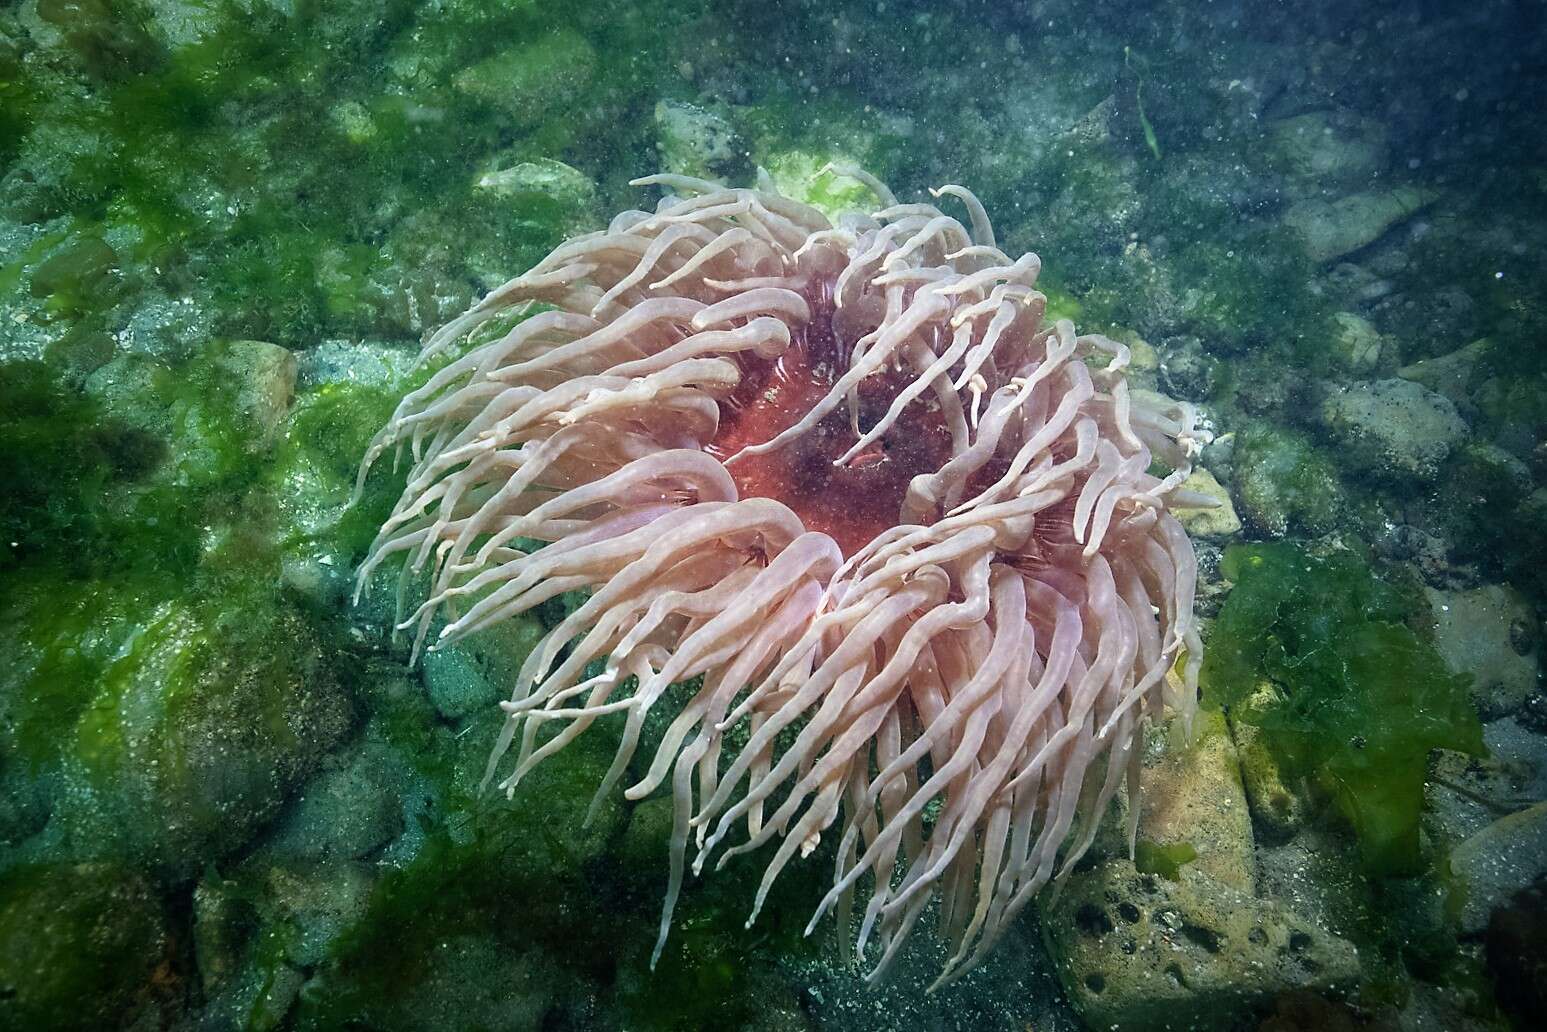 Image of crusty red anemone